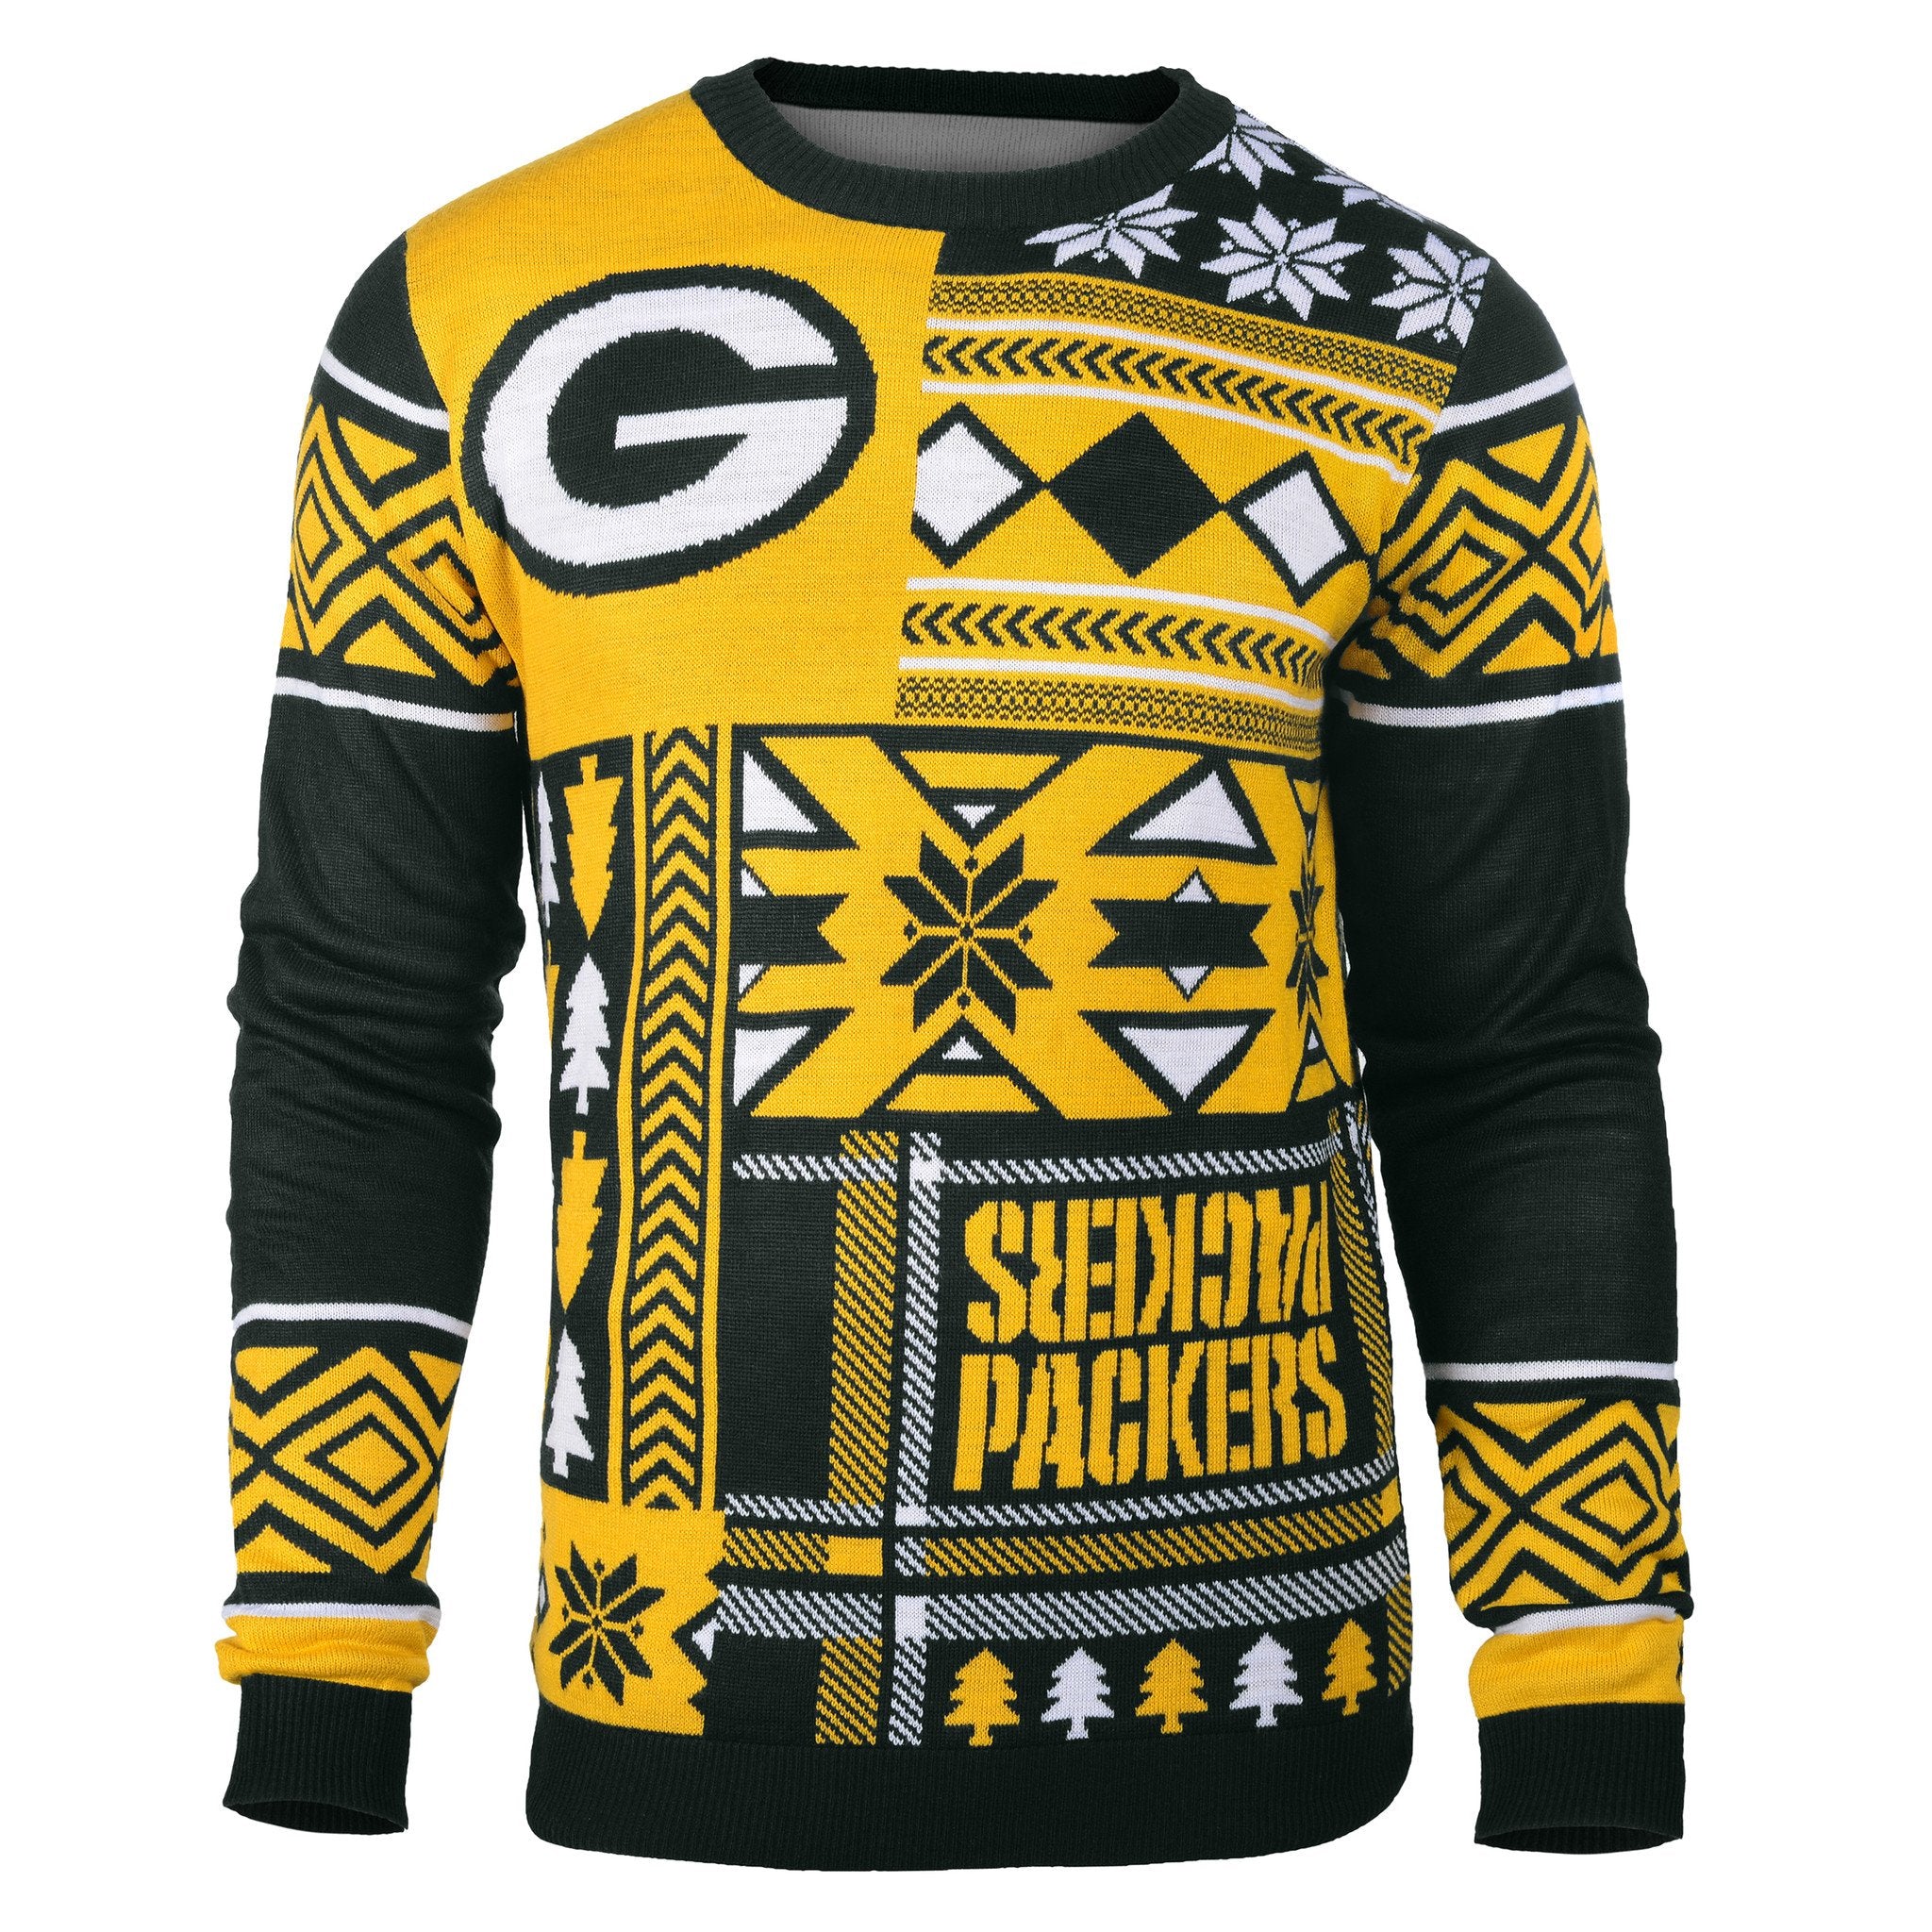 Ugly Green Bay Packers Sweater 